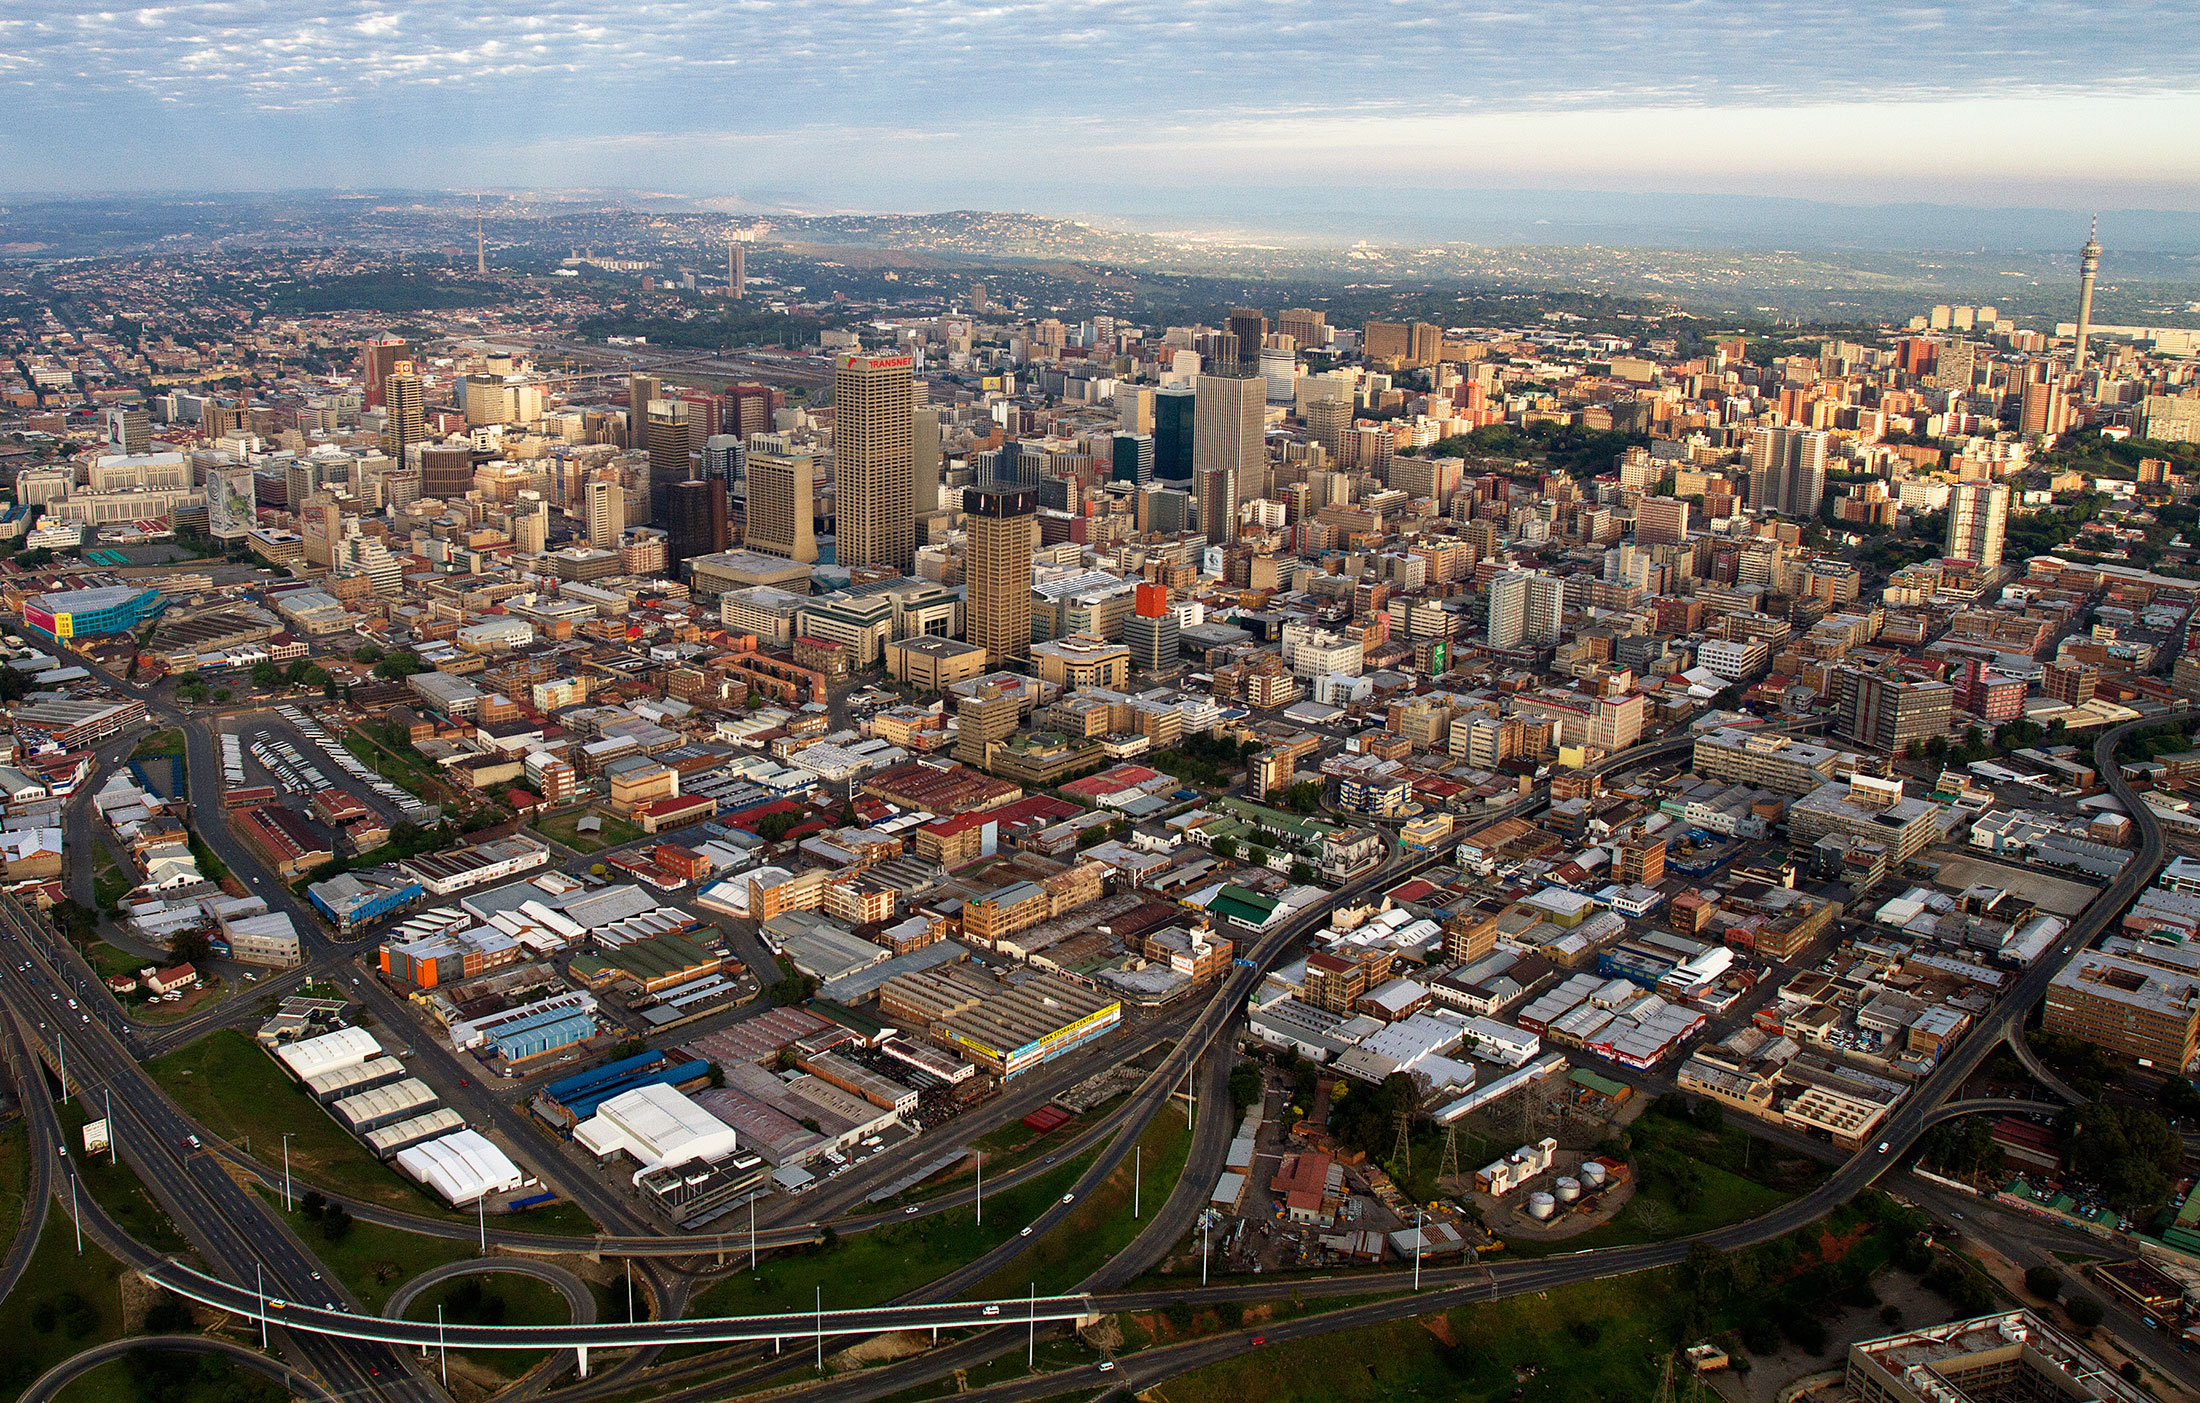 Aerial view of the city skyline in Johannesburg, South Africa.